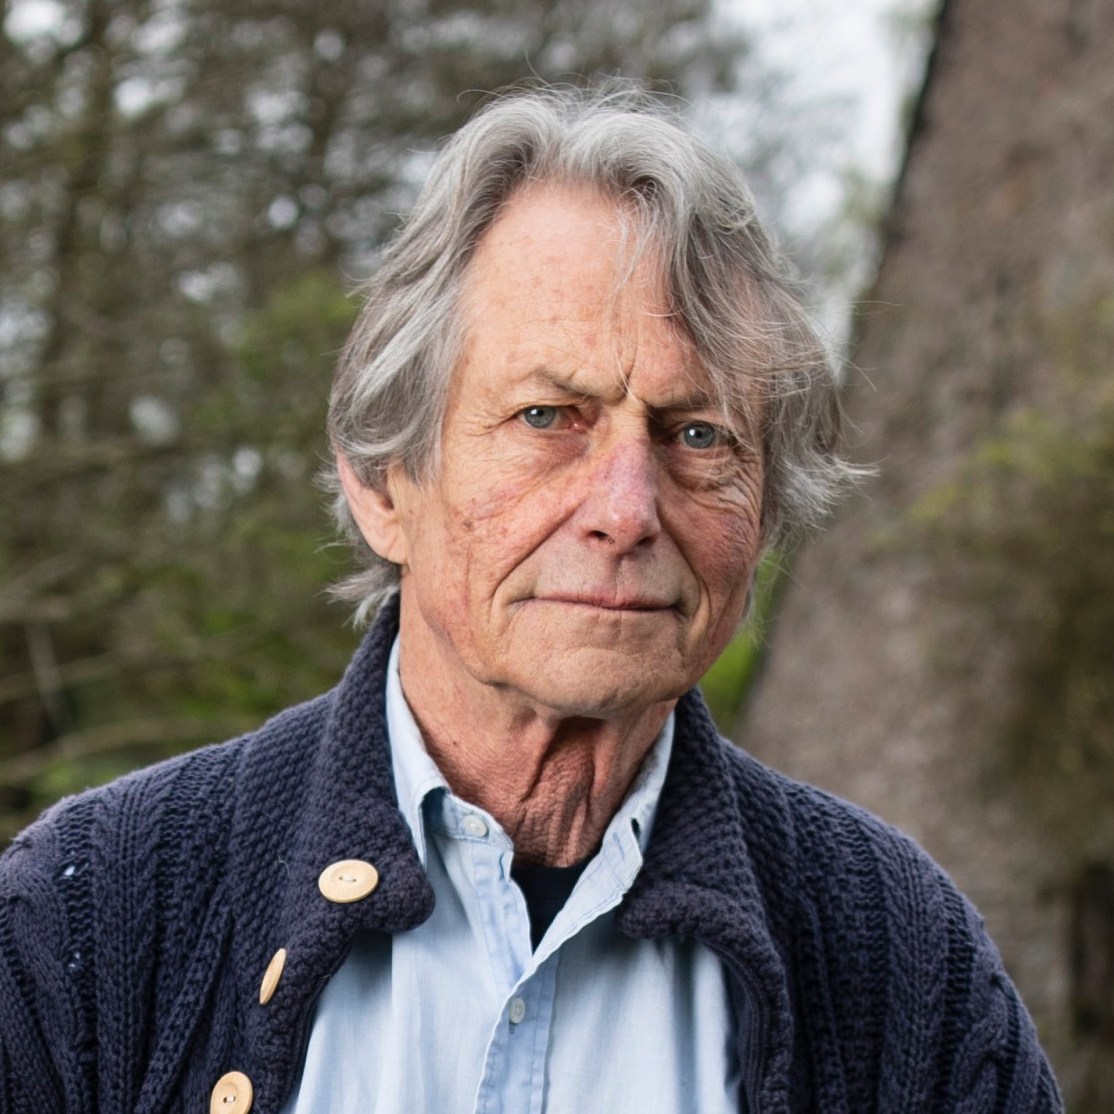 Bruce Robinson at home in Herefordshire